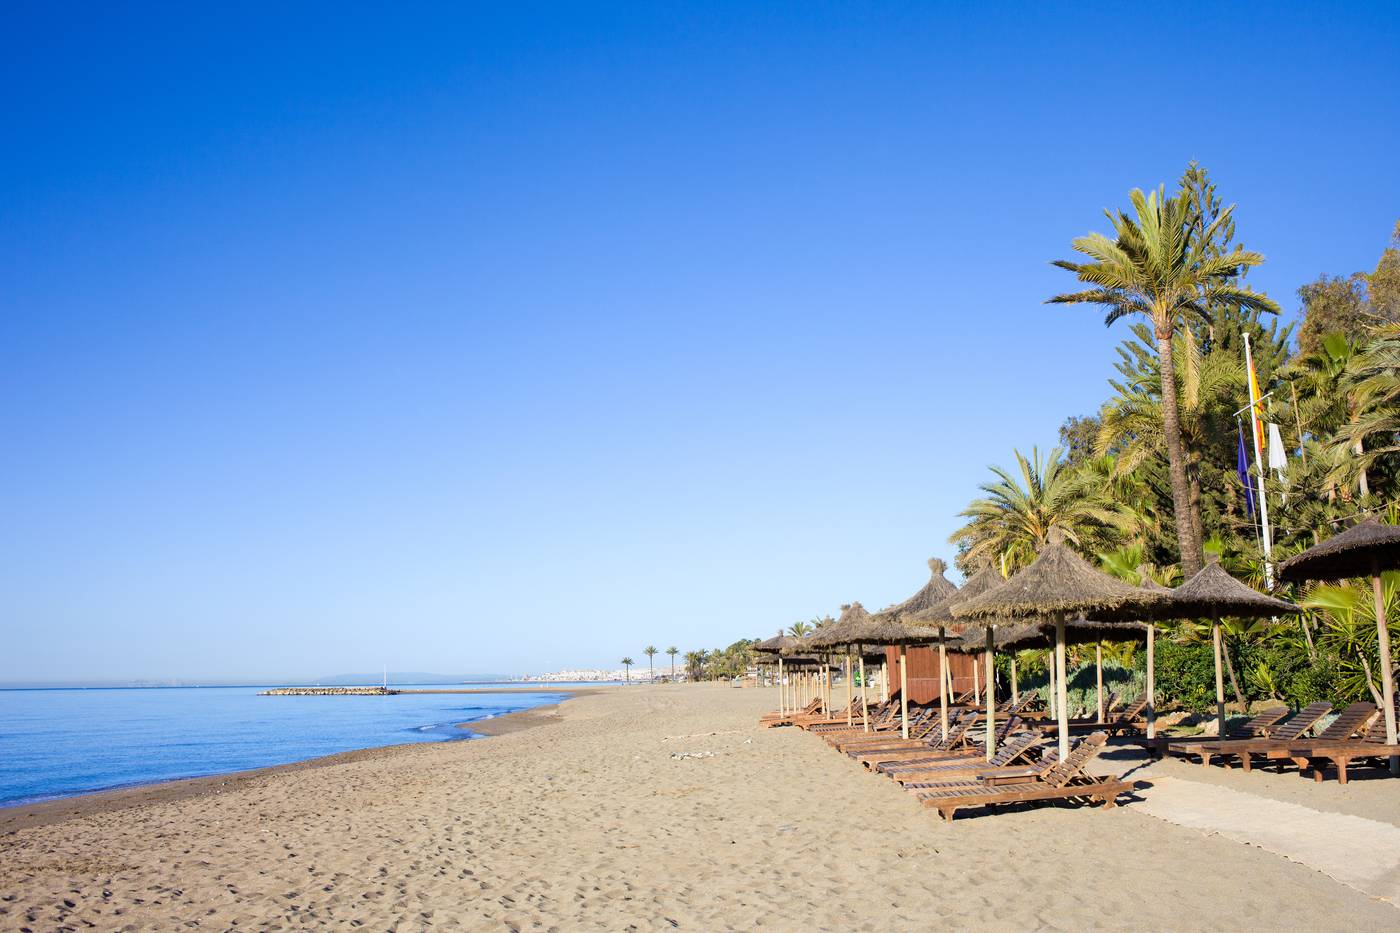 Sun loungers on a sandy beach by the Mediterranean Sea at the popular resort of Marbella in southern Spain, Costa del Sol, Andalusia region, Malaga province.